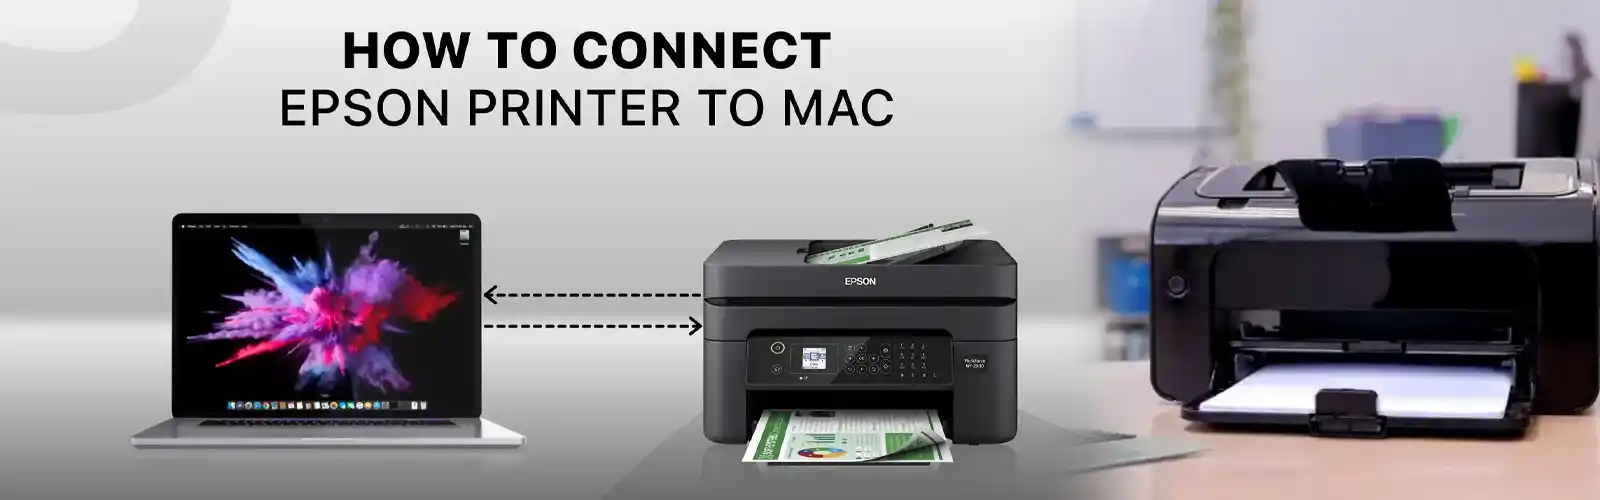 How-To-Add-Printer-To-Mac-Can-We-Help